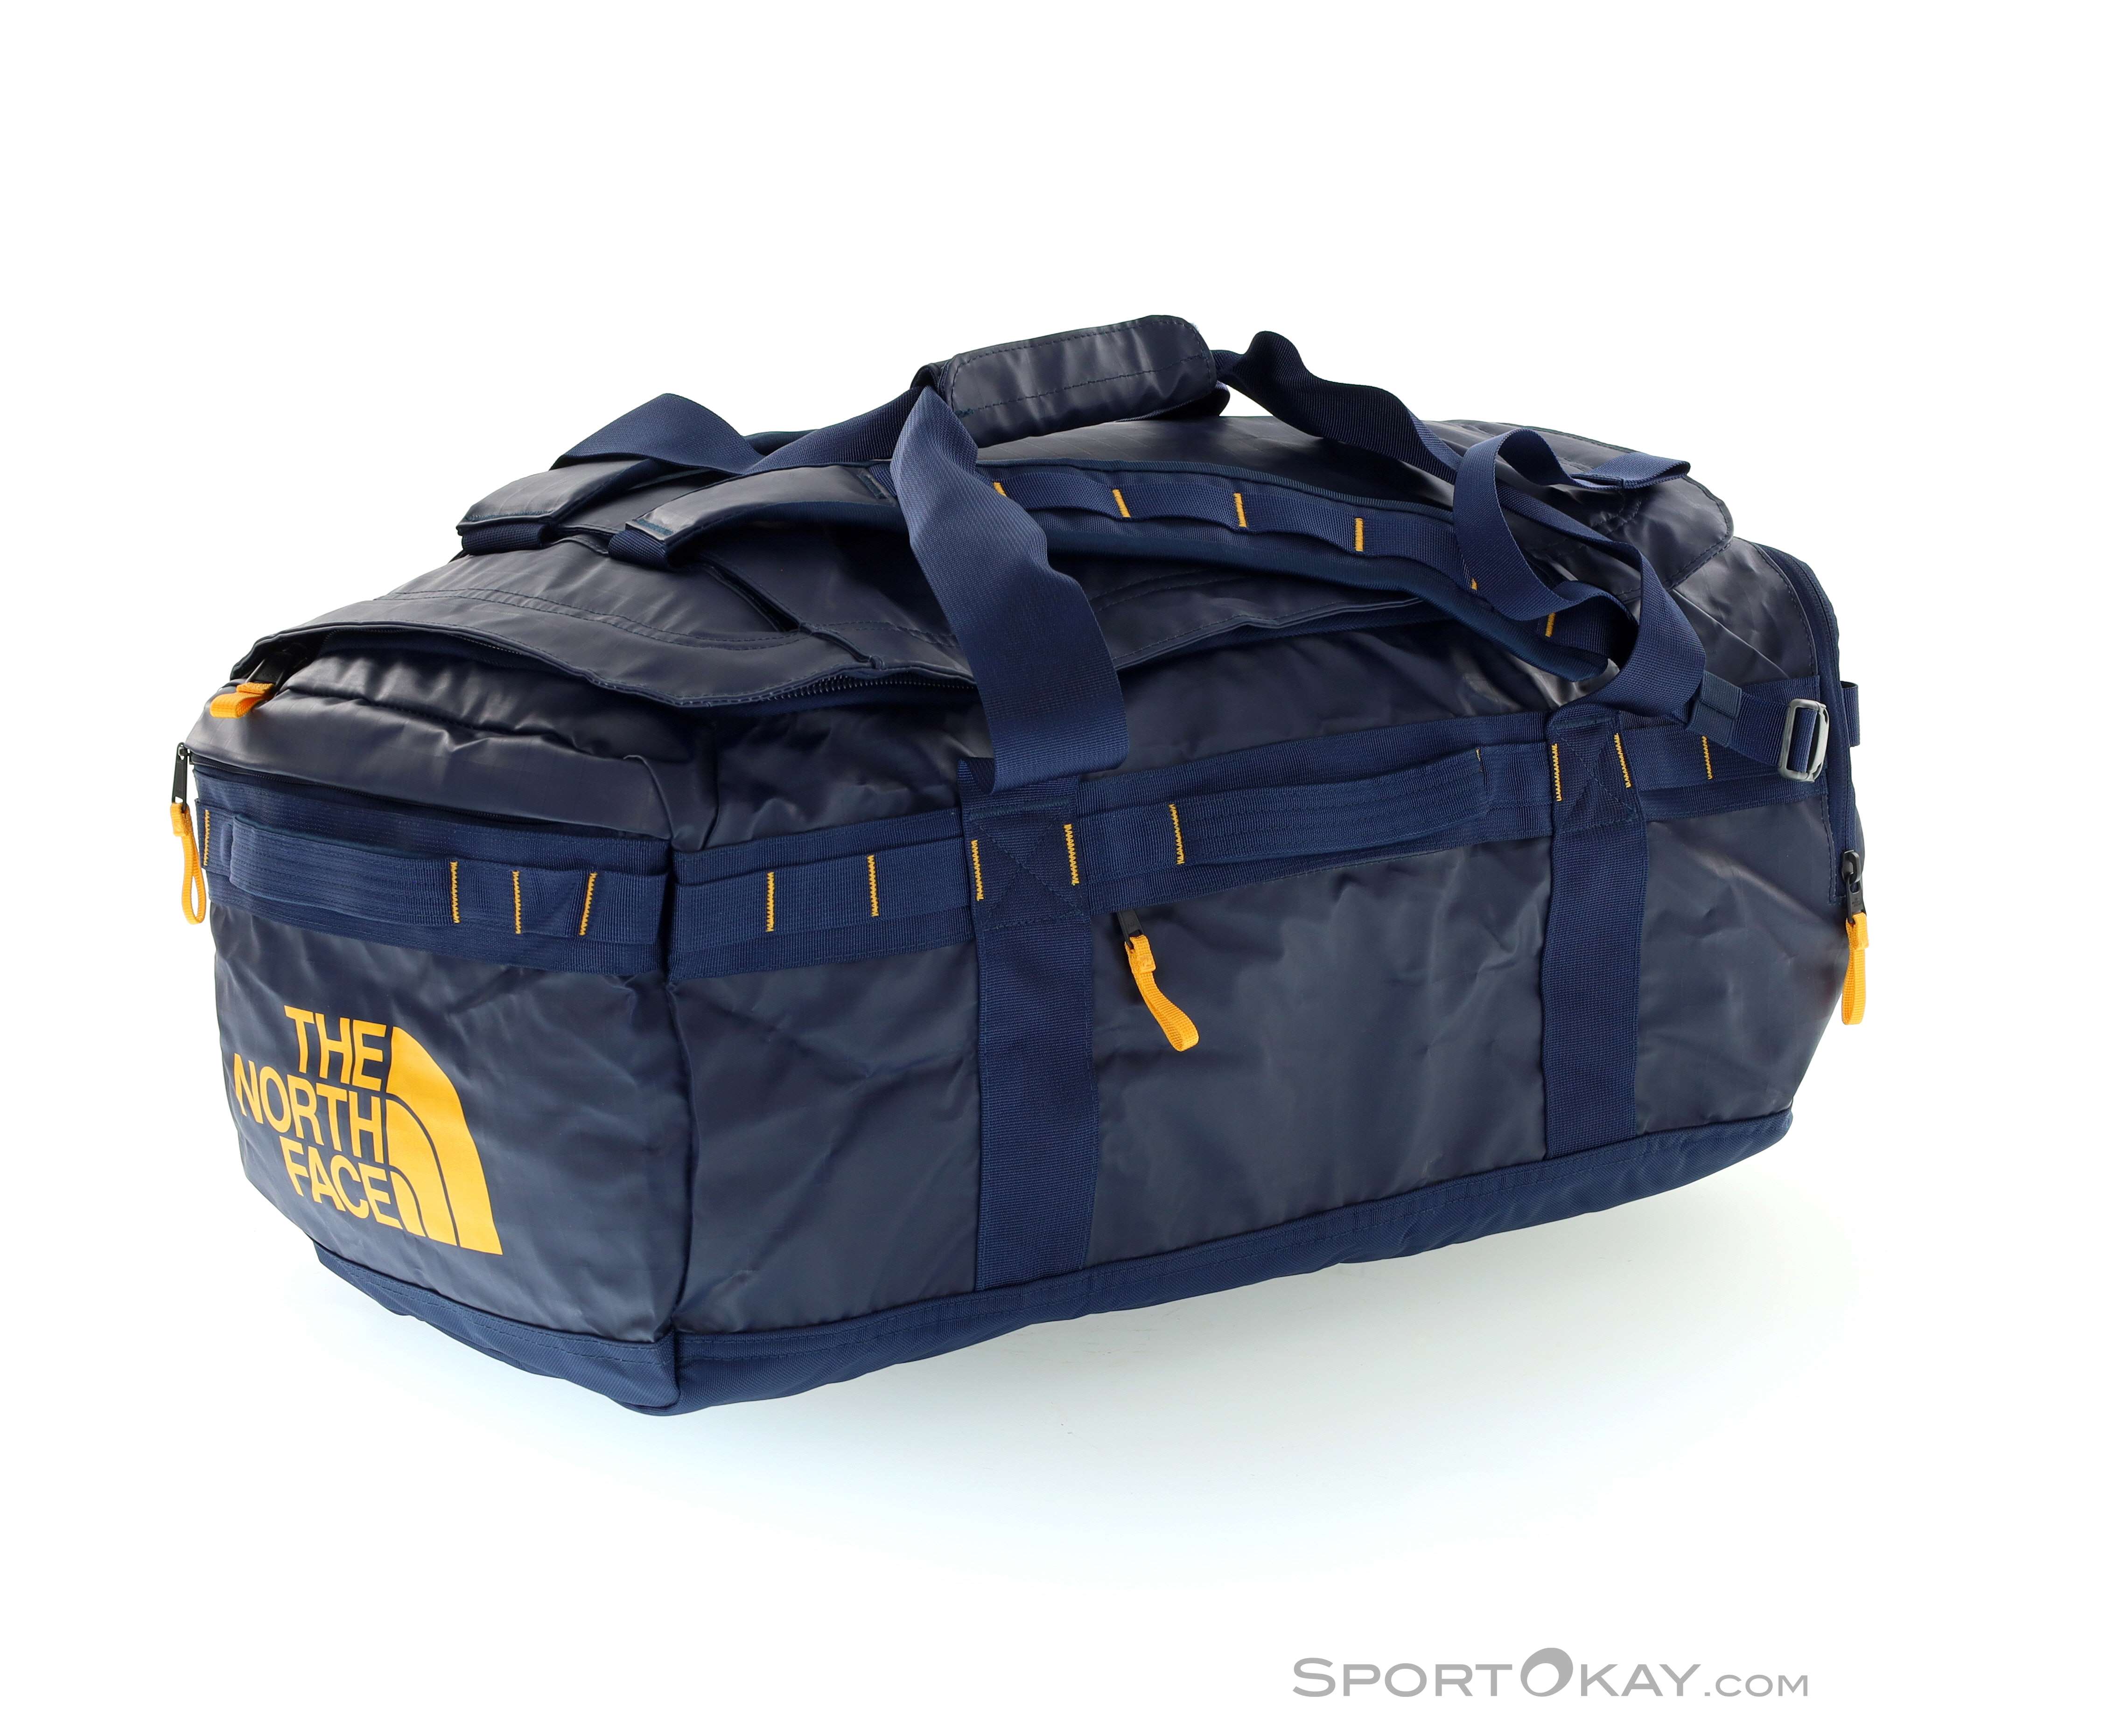 The North Face Base Camp Voyager Duffel 62L Duffel Bag – acheter